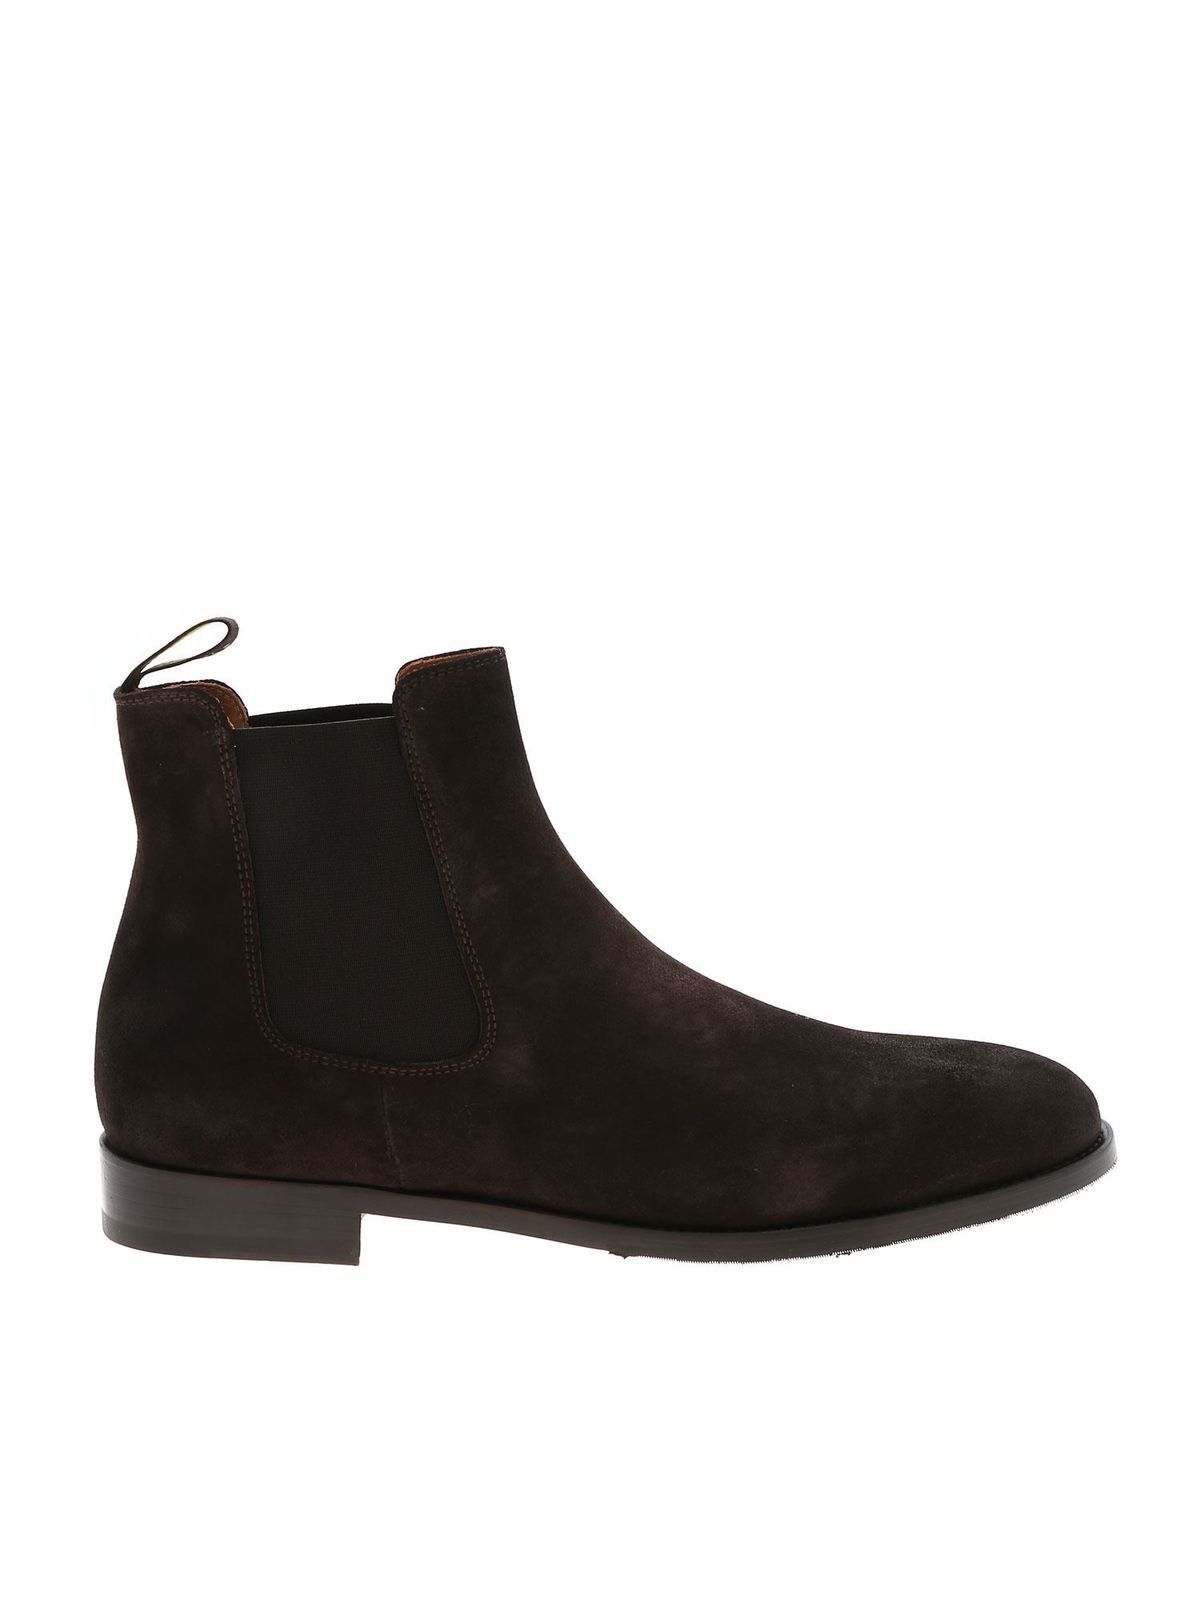 Doucal's - Chelsea suede in brown color - ankle boots - DU1307ASTIUF024TM00